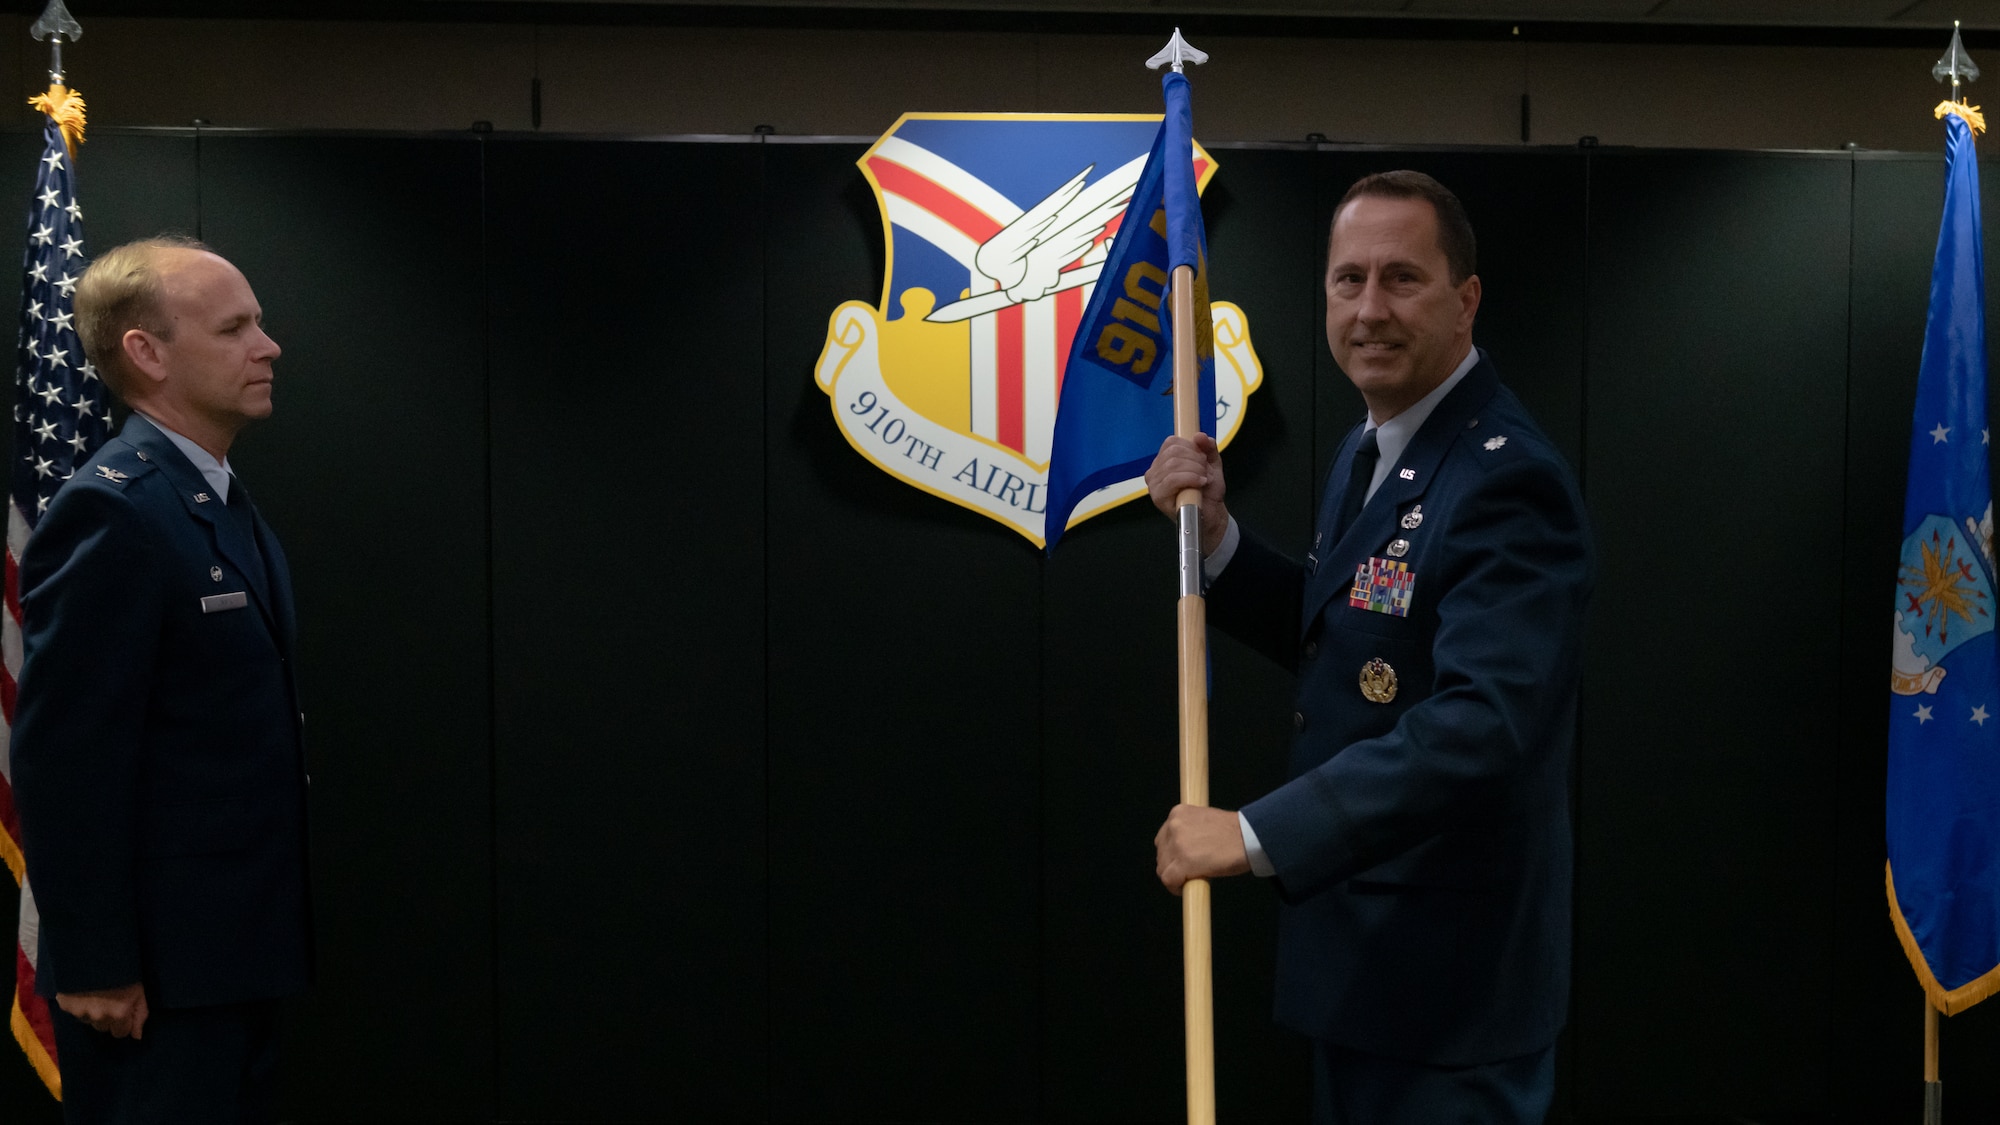 Lt. Col. Joe Winchester, the 910th Maintenance Group commander, officially assumes command of the 910th MXG, Sept. 12, 2020, at Youngstown Air Reserve Station. Winchester replaced the outgoing commander, Col. Sharon Johnson.